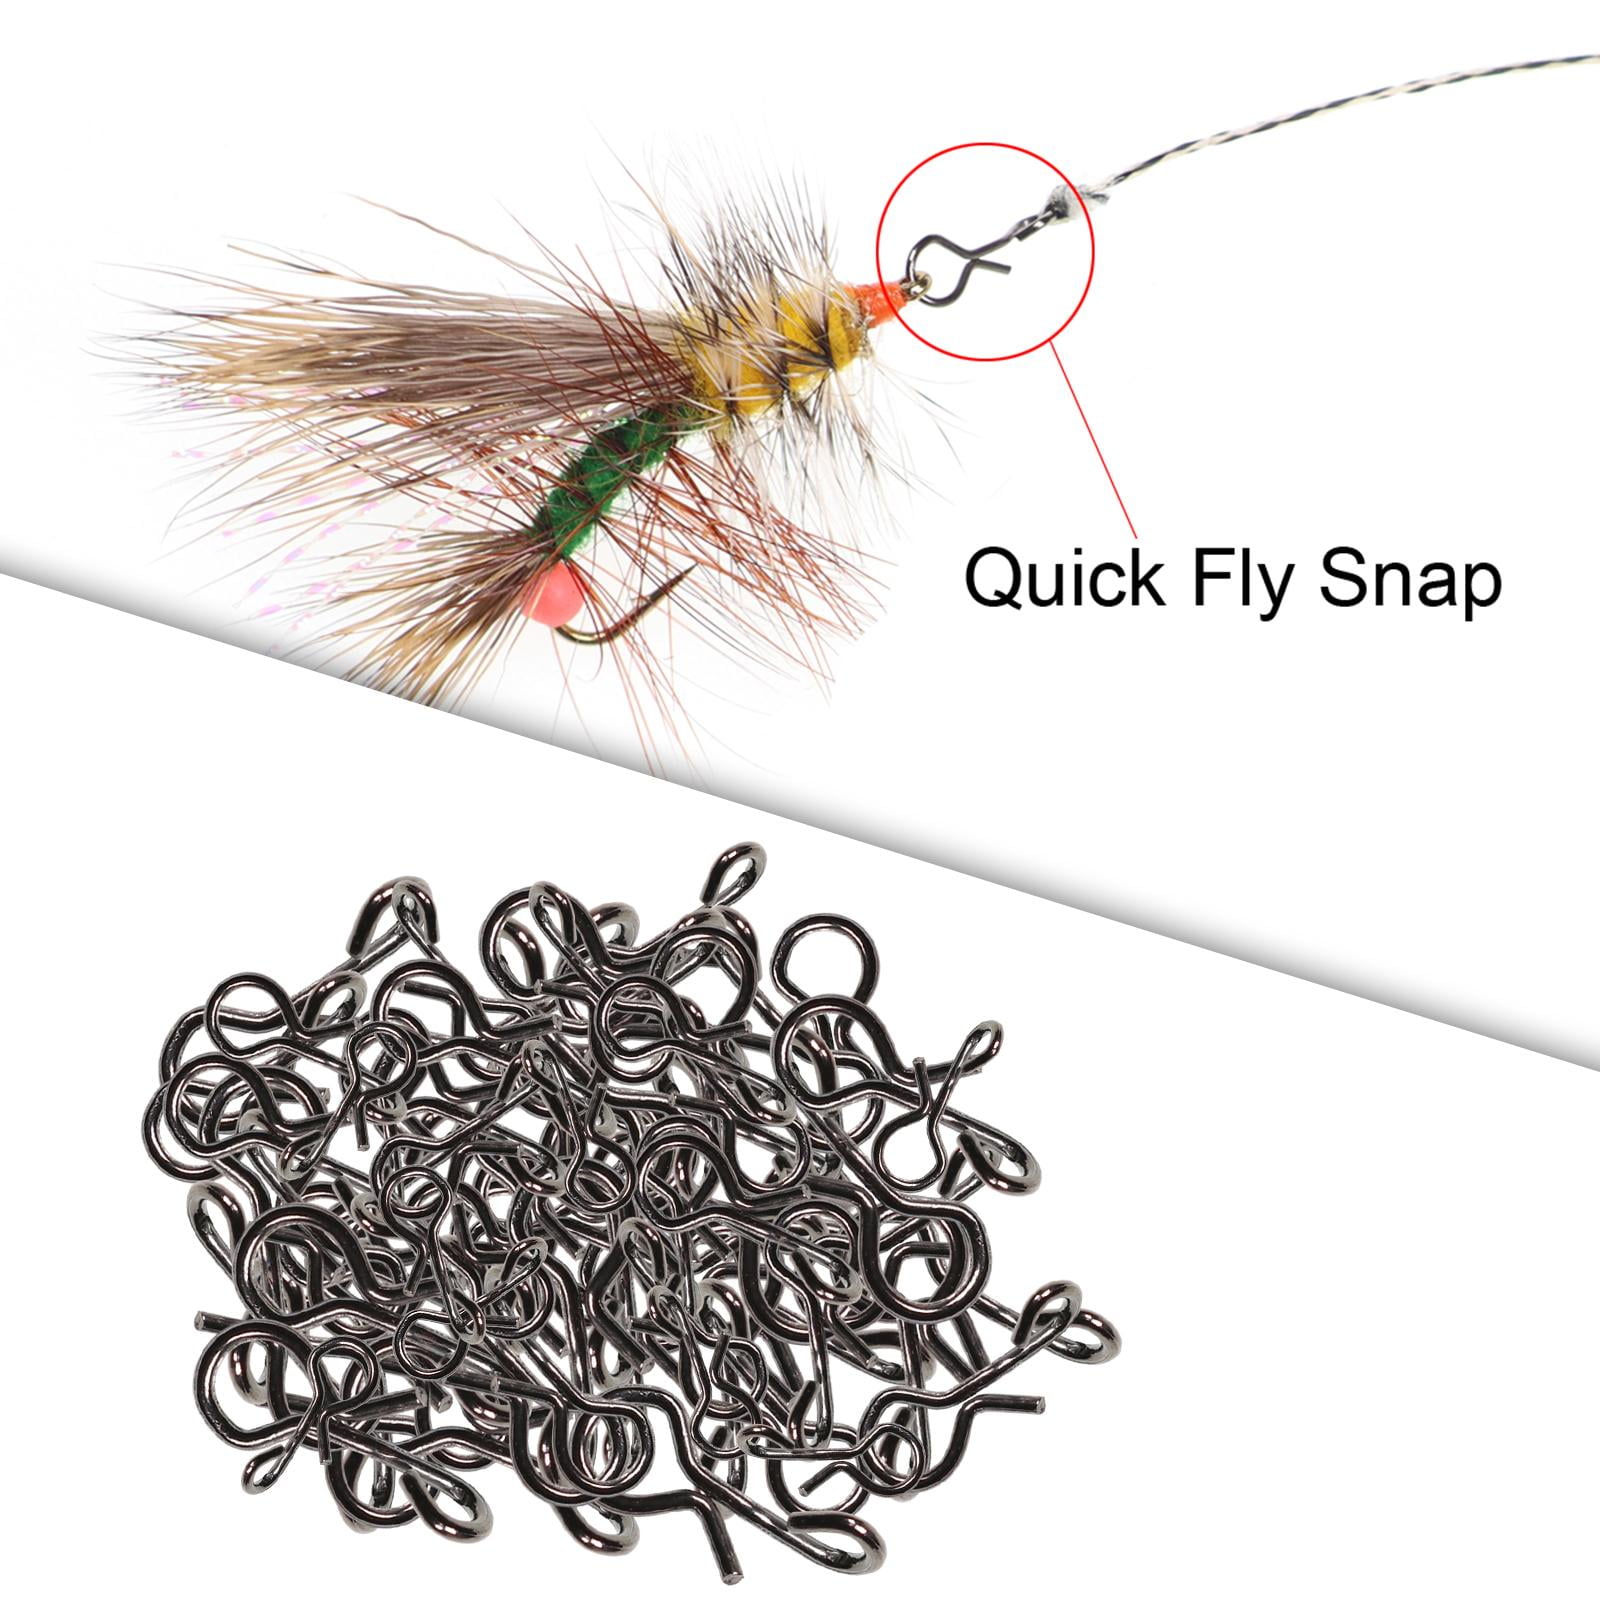 250x Metal Fly Fishing Snaps Quick Clips Sizes for Fishing 